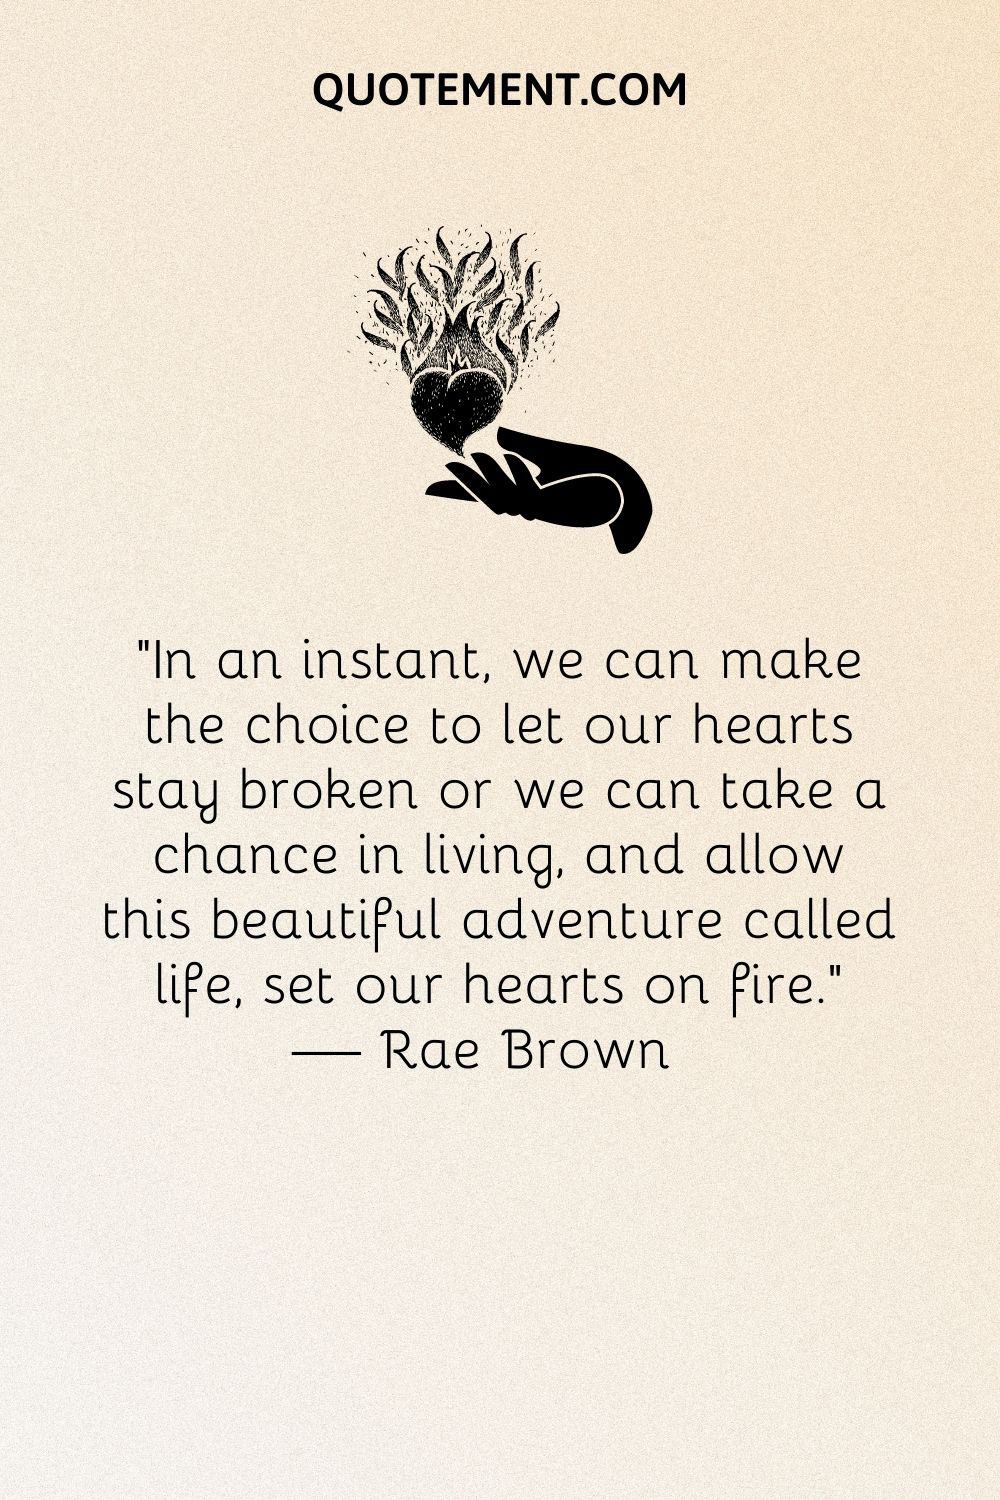 In an instant, we can make the choice to let our hearts stay broken or we can take a chance in living